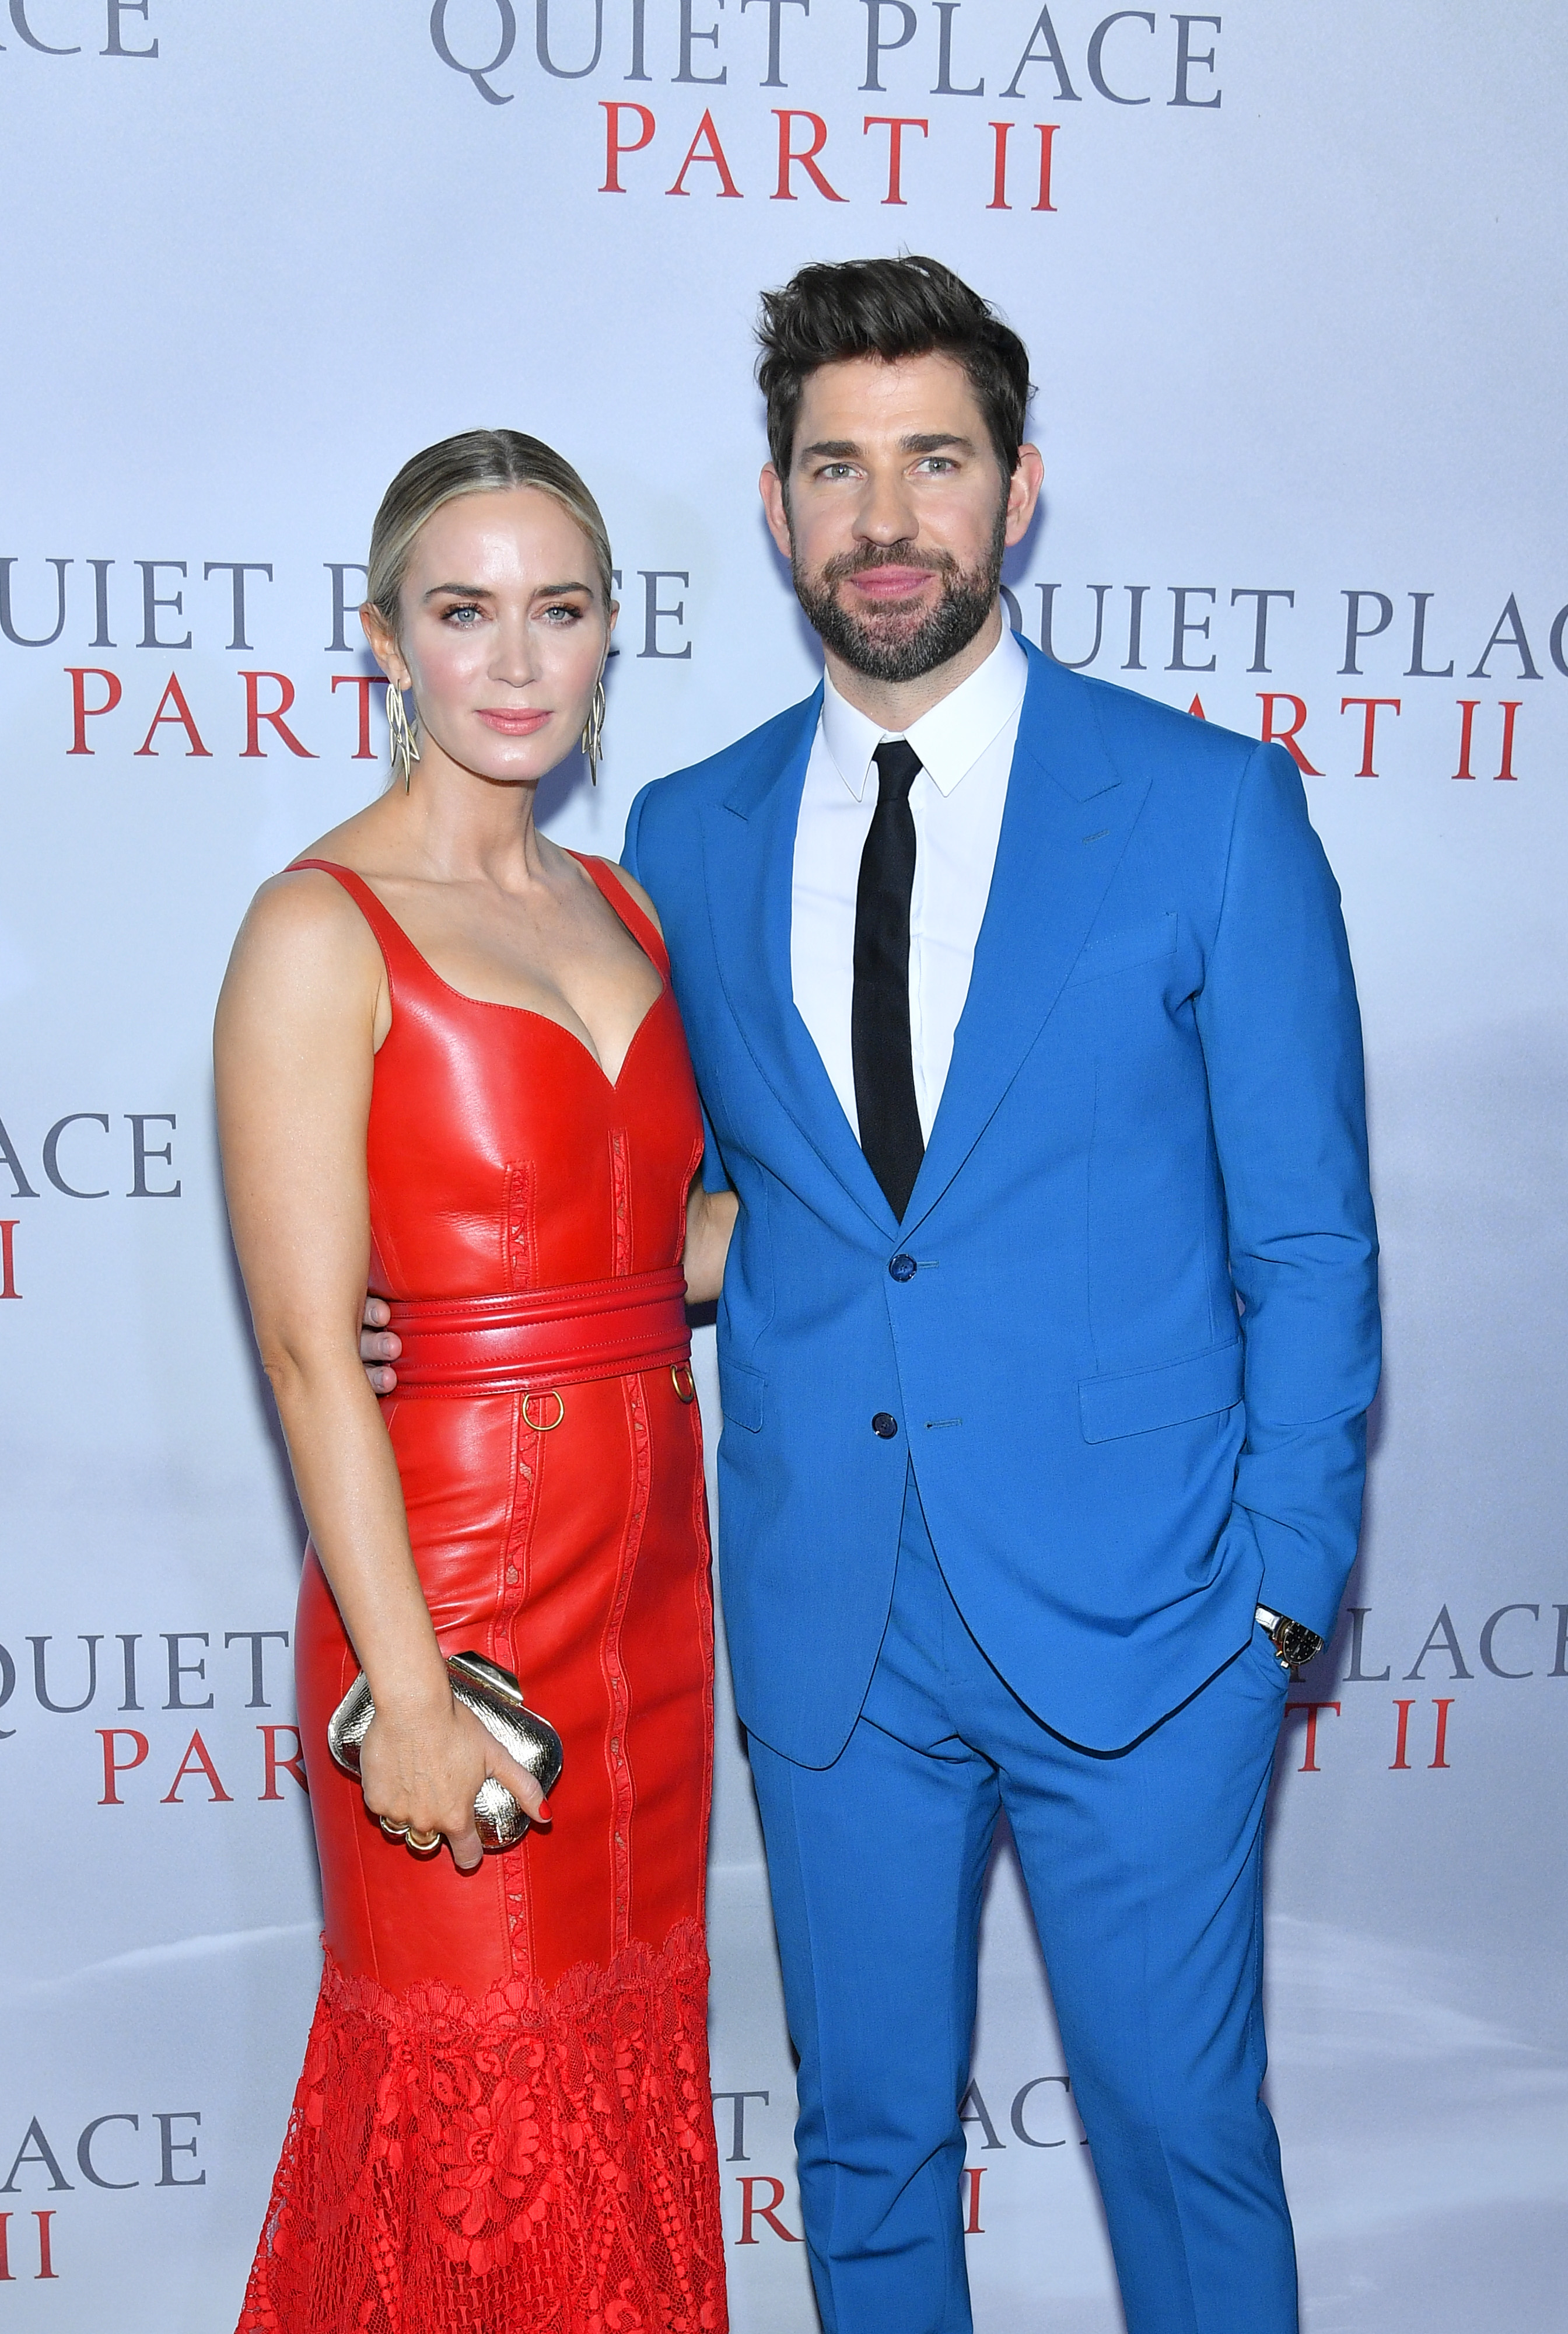 John Krasinski and Emily Blunt attend the World Premiere of "A Quiet Place Part II" at Lincoln Center's Frederick P. Rose Hall in New York, on March 8, 2020. | Source: Getty Images